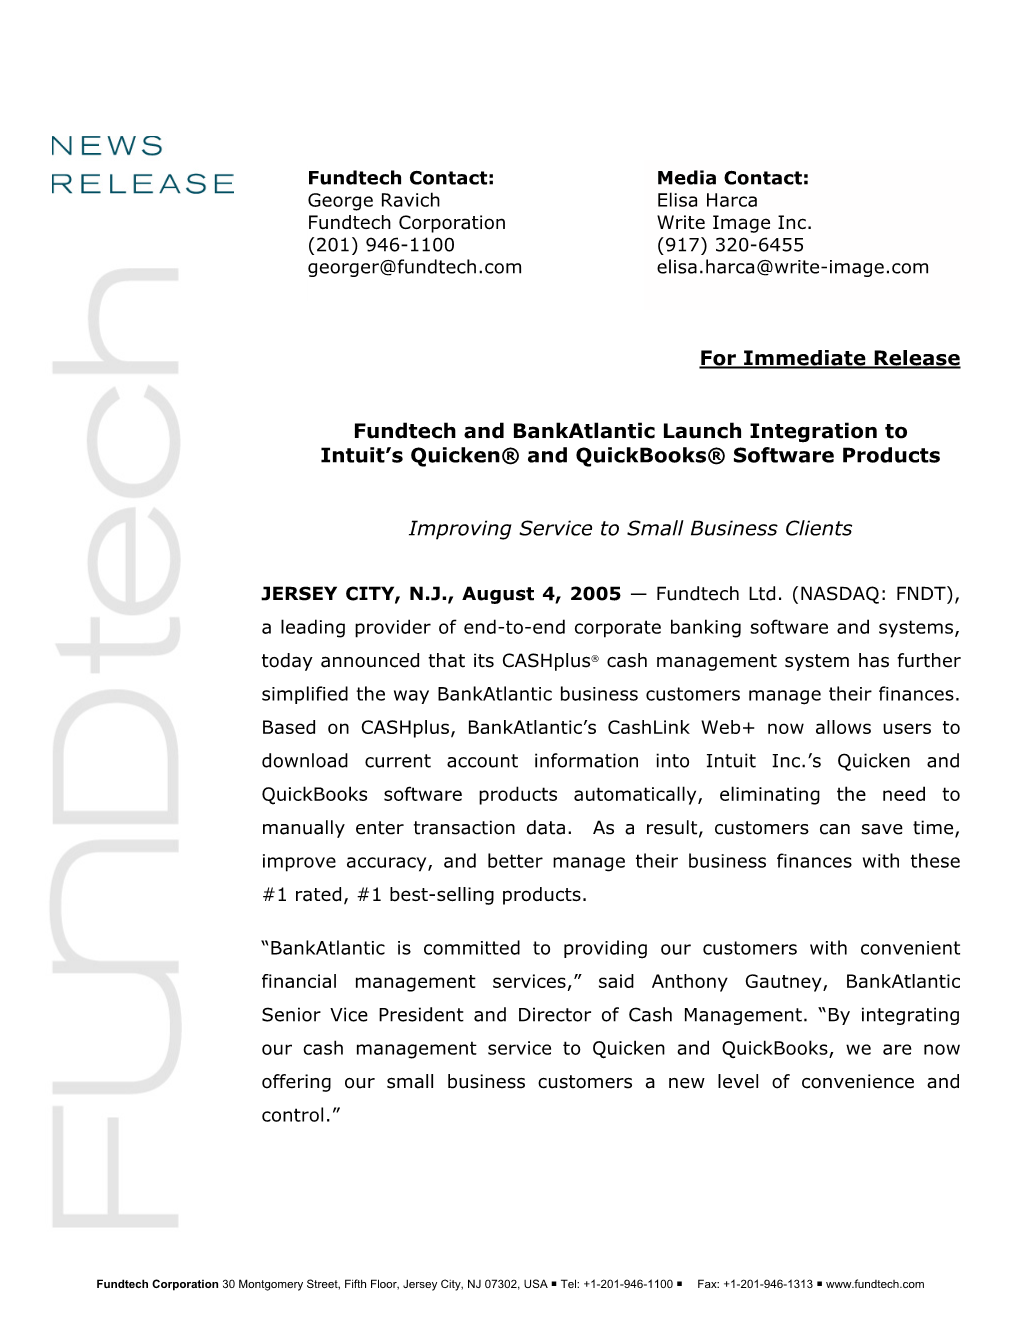 For Immediate Release Fundtech and Bankatlantic Launch Integration To